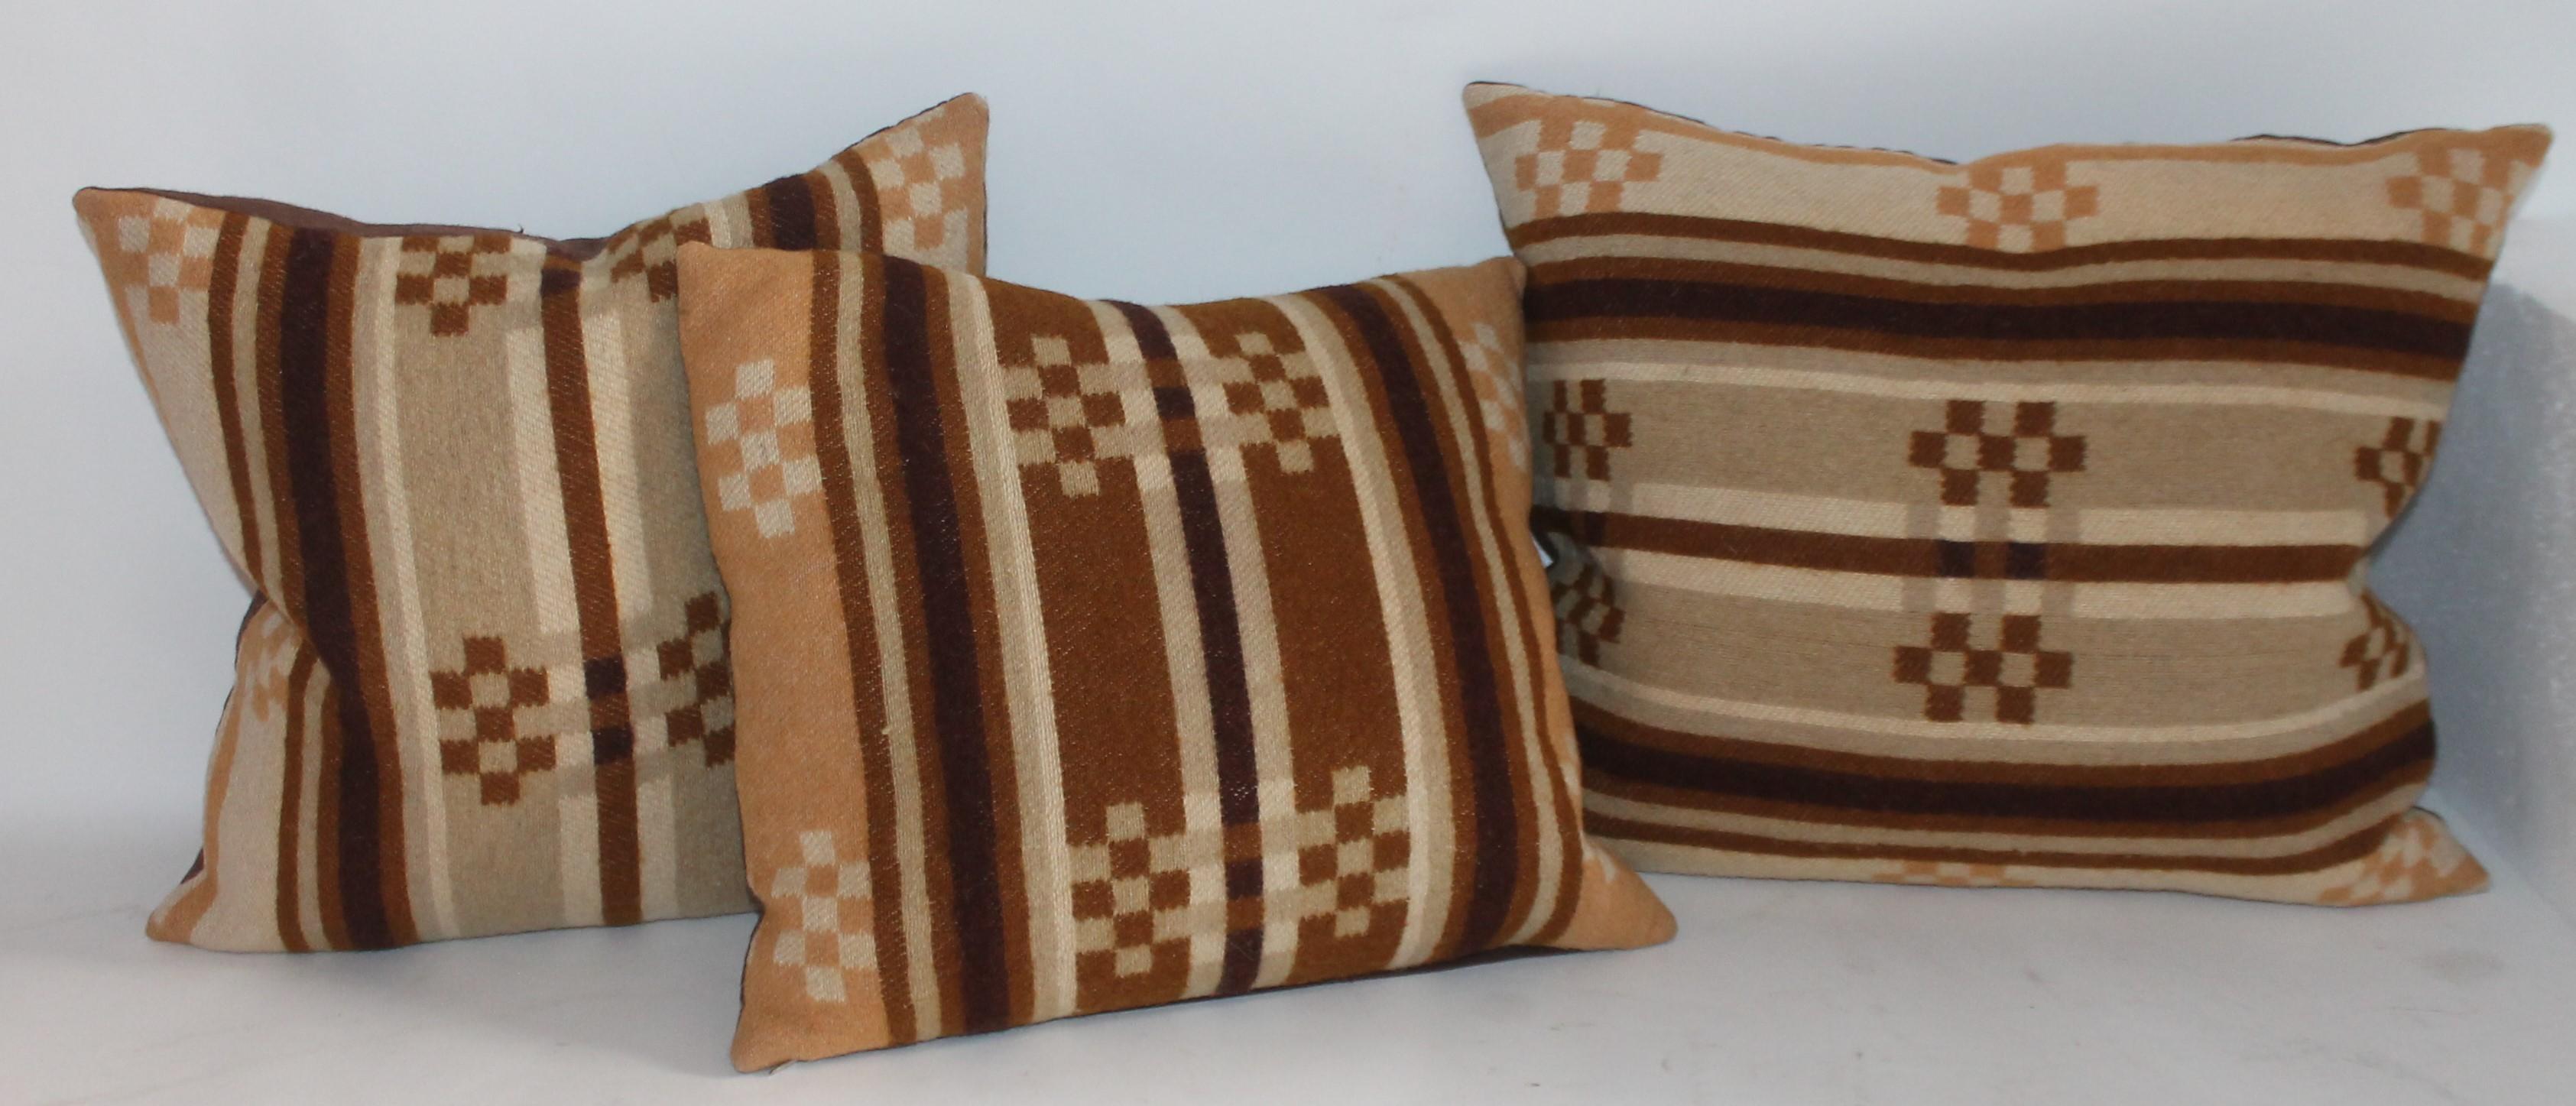 These 19th century horse blanket pillows are all different sizes and shapes. Great as one grouping on a sofa or bed. Largest is 16 x 18. Others are 15 x 15 and 14 x 15. Total of three pillows.